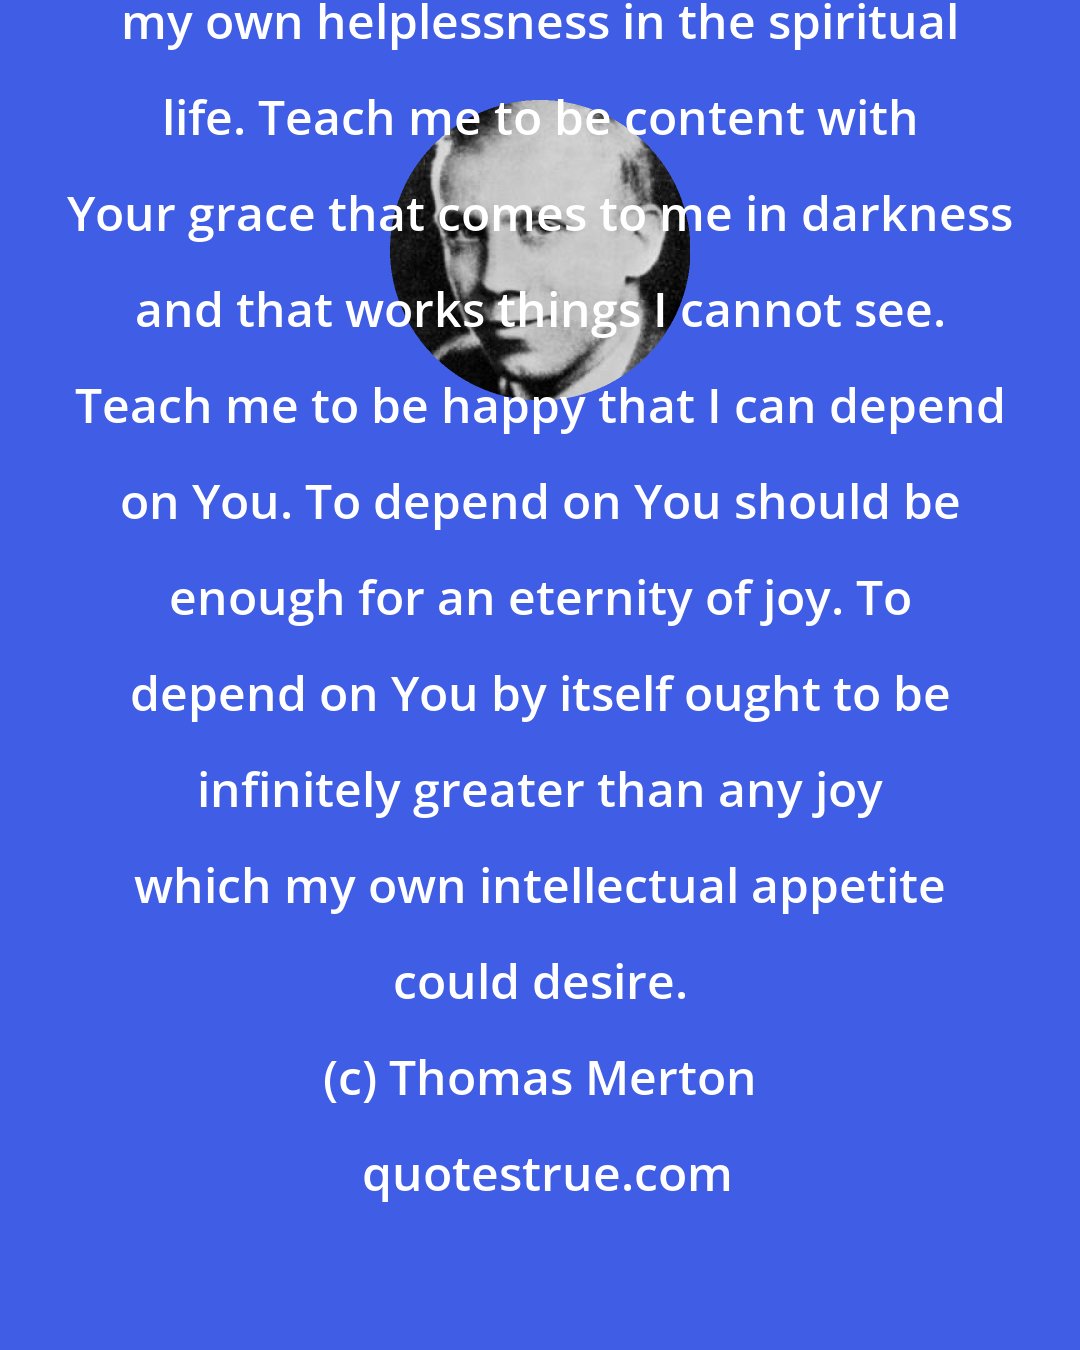 Thomas Merton: O God, teach me to be satisfied with my own helplessness in the spiritual life. Teach me to be content with Your grace that comes to me in darkness and that works things I cannot see. Teach me to be happy that I can depend on You. To depend on You should be enough for an eternity of joy. To depend on You by itself ought to be infinitely greater than any joy which my own intellectual appetite could desire.